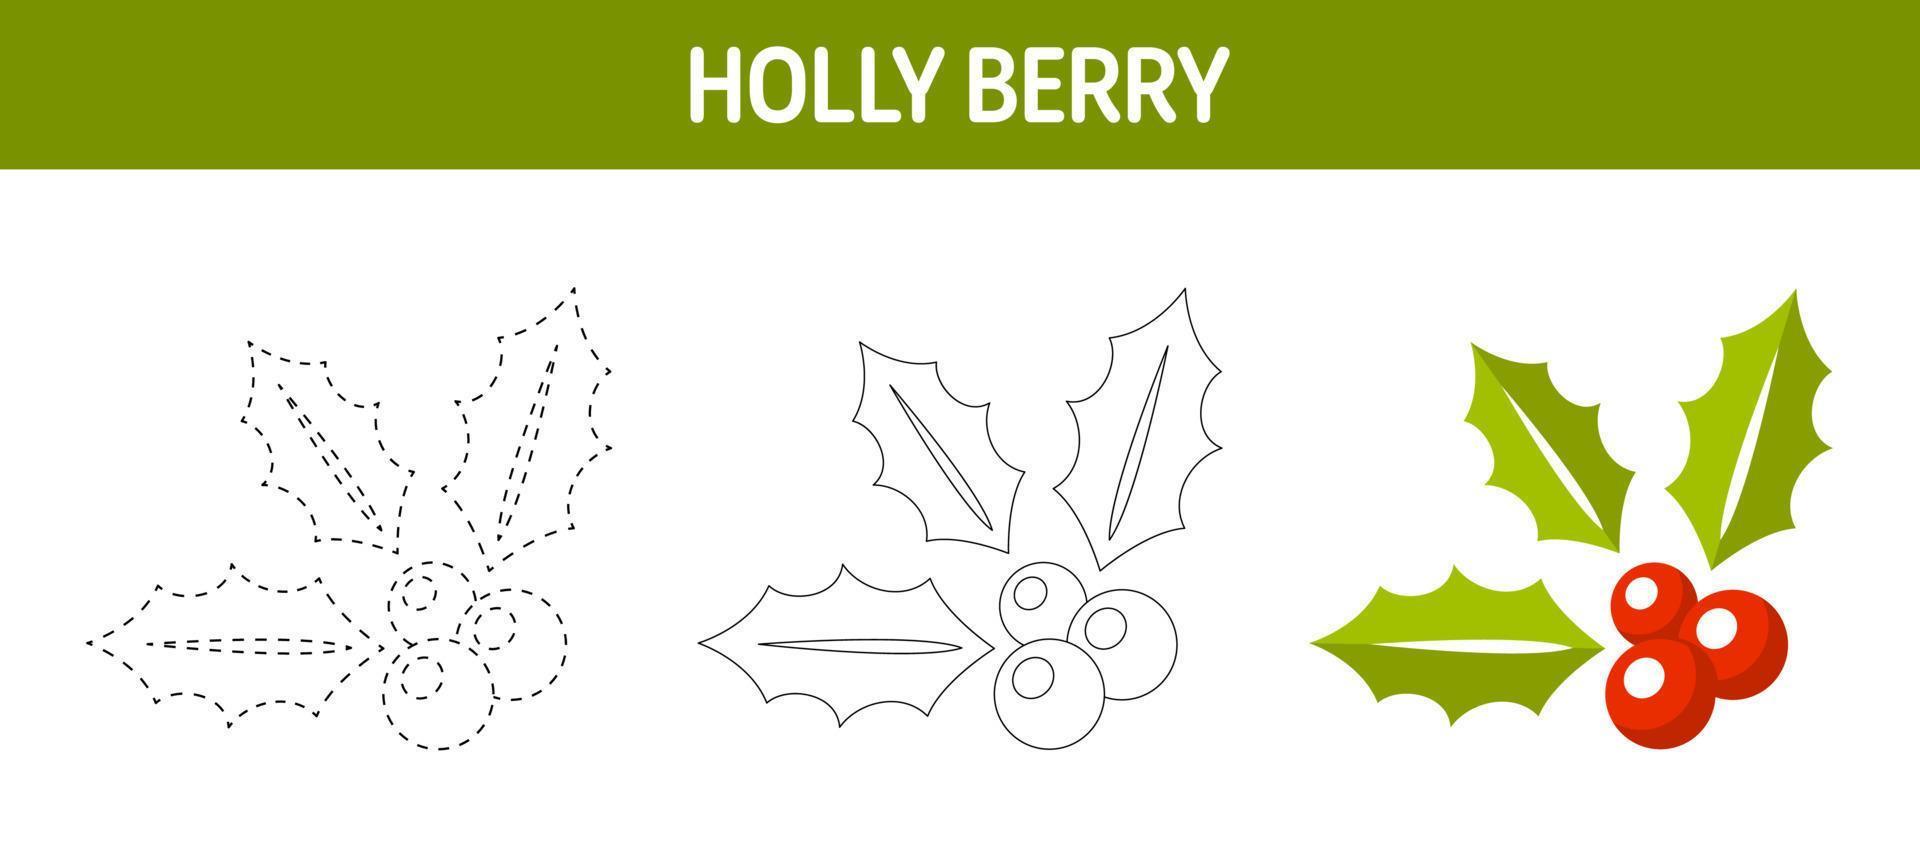 Holly Berry tracing and coloring worksheet for kids vector